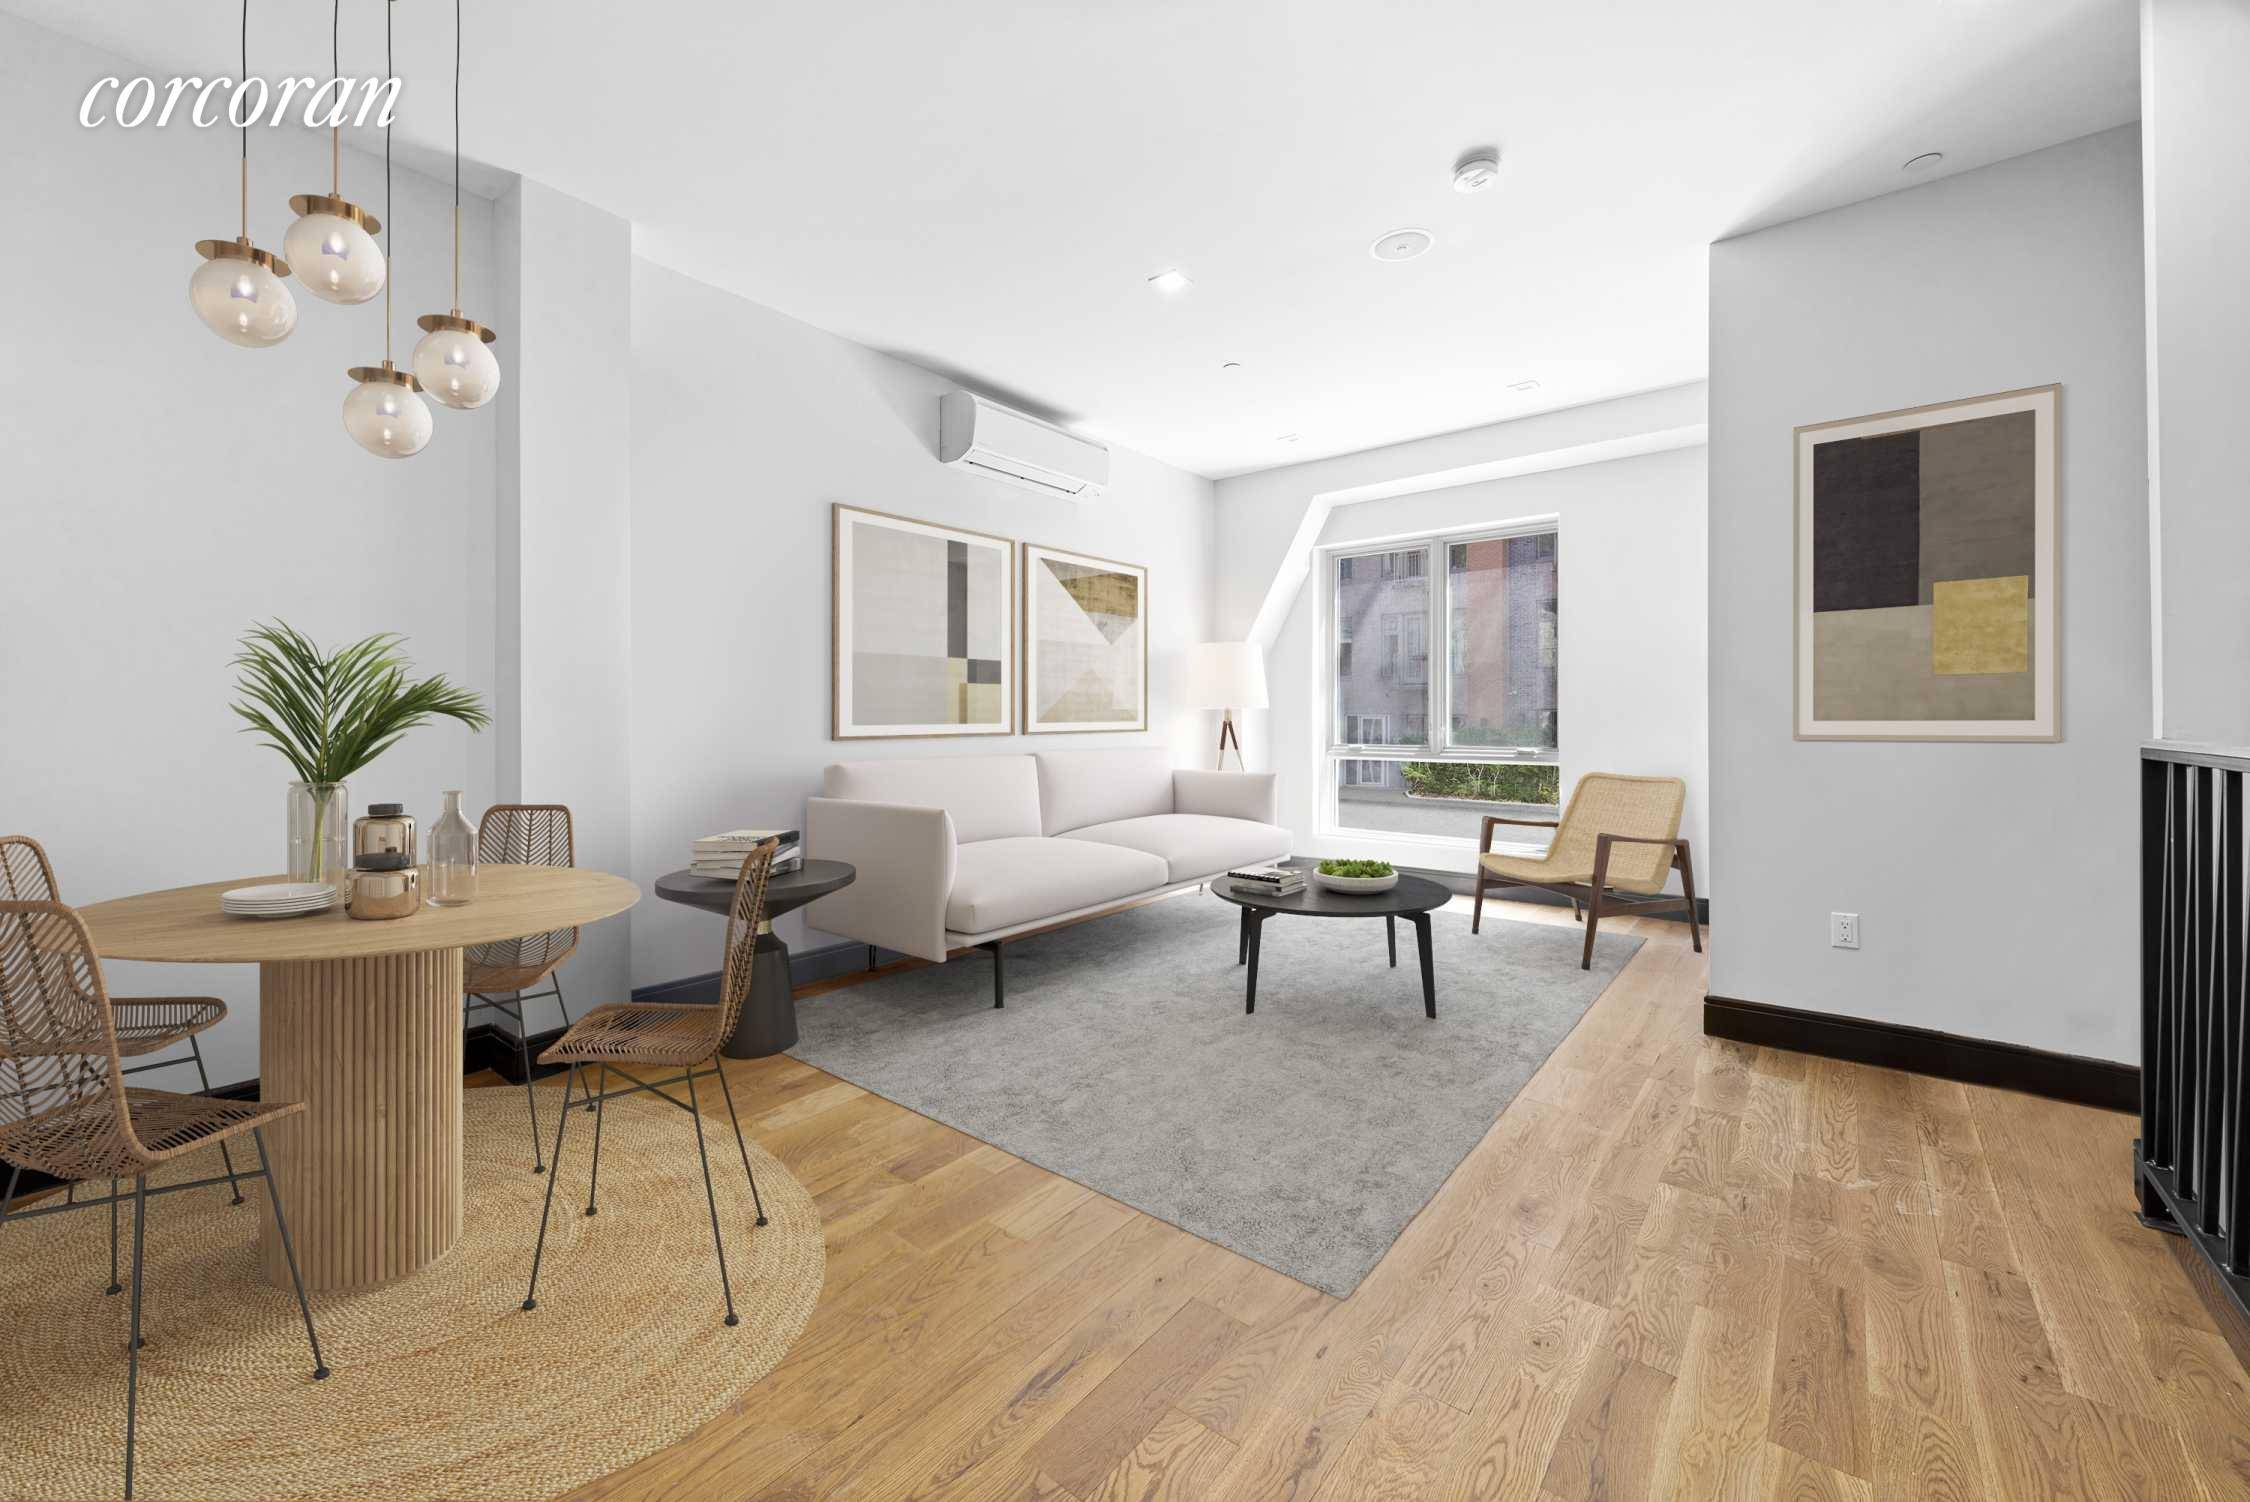 1A is a beautifully designed one bedroom duplex home in a brand new boutique building that features a spacious open concept, washer dryer and amazing closet space.